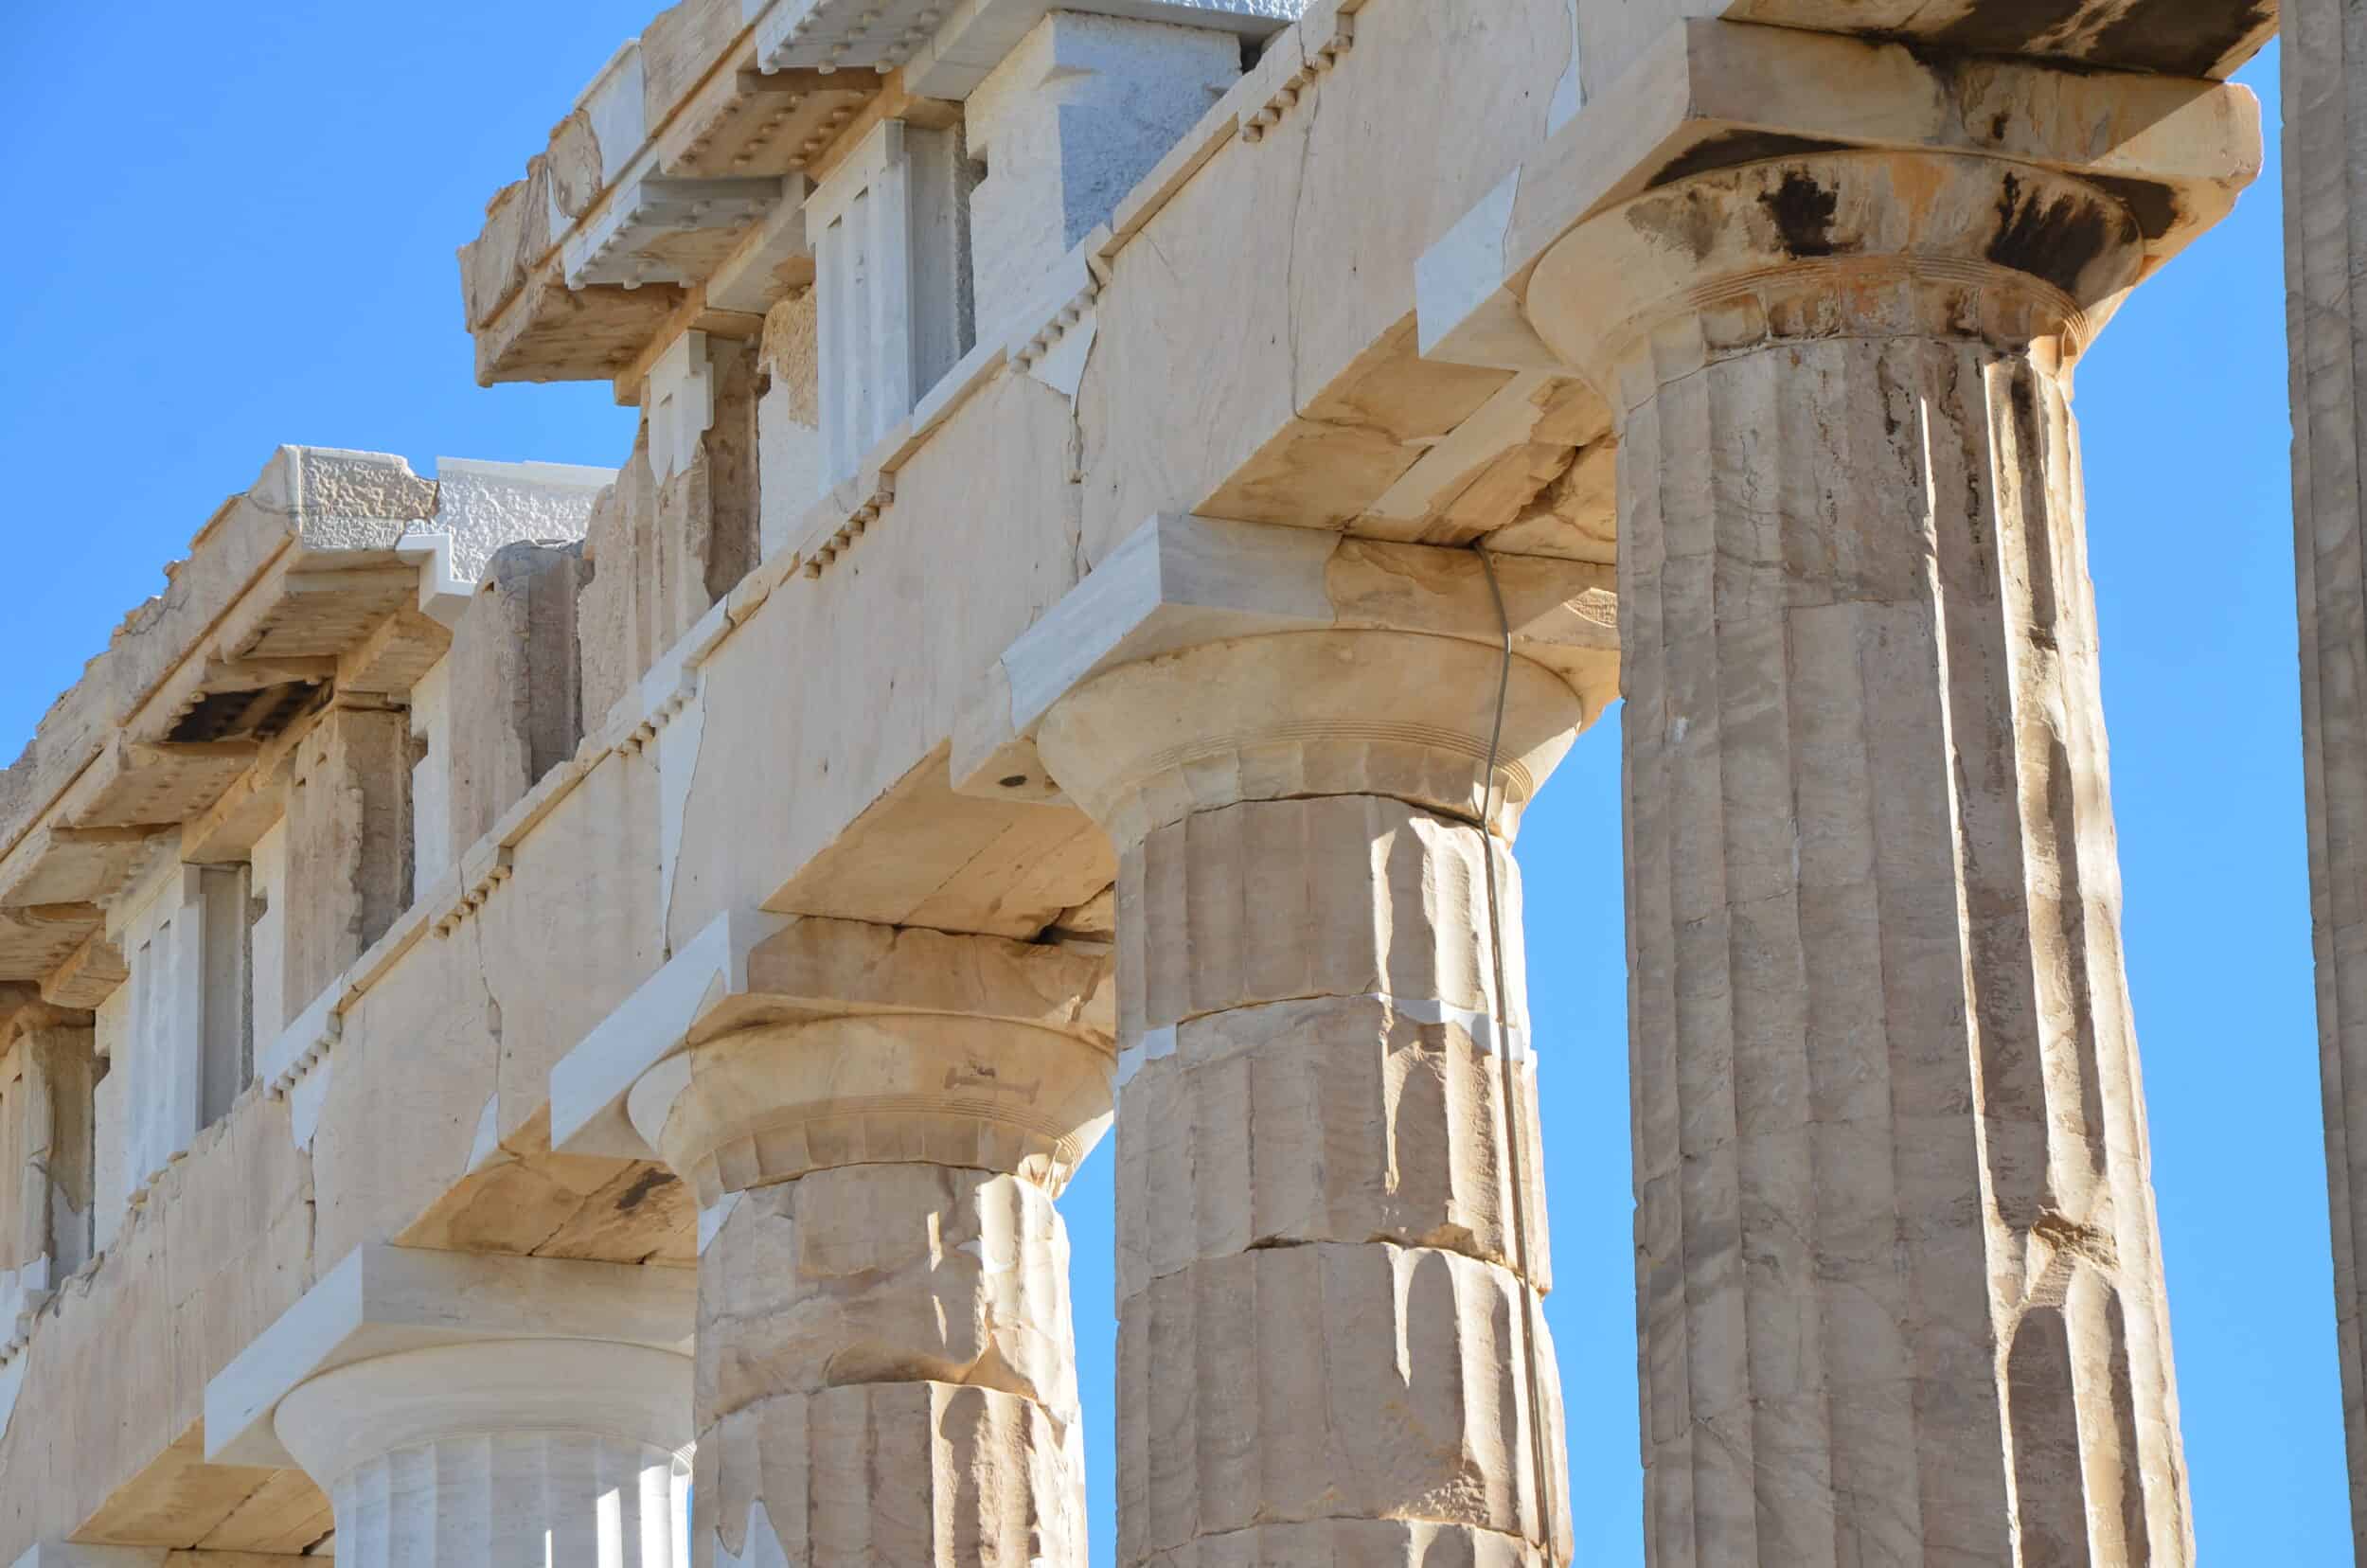 Columns on the north side of the Parthenon at the Acropolis, Athens, Greece